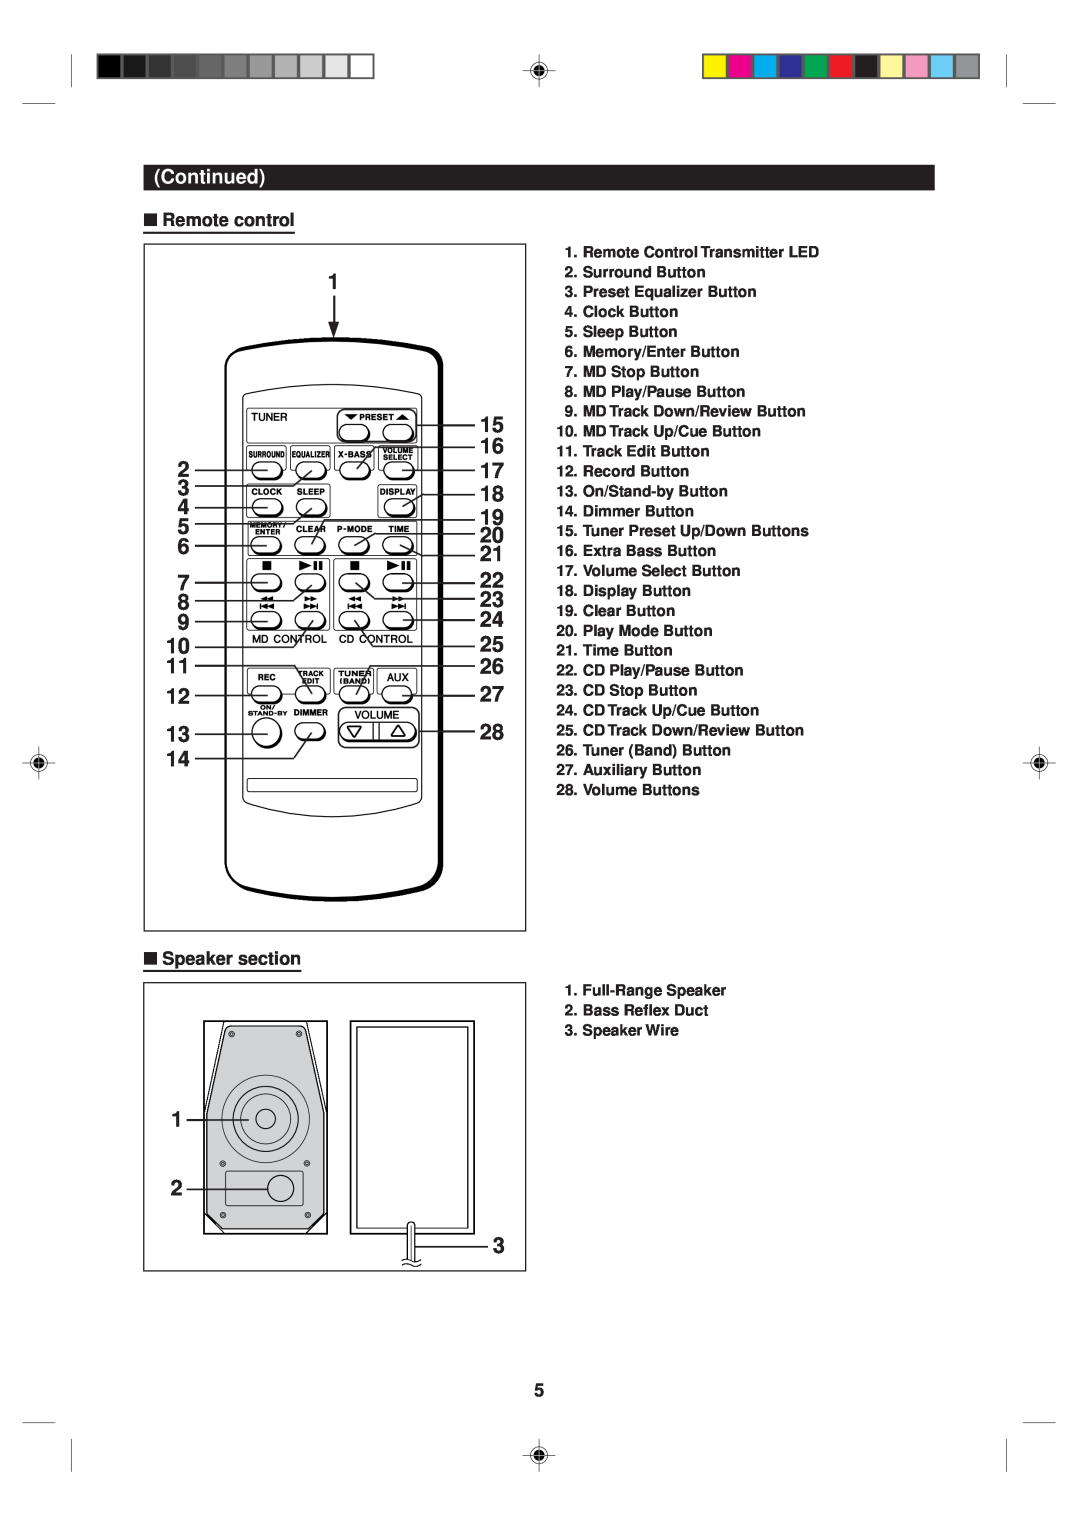 Sharp MD-MX10H operation manual Remote control, Speaker section, 1 2 3 4 5 6 7, 15 16 17 18 19 20 21, Continued 